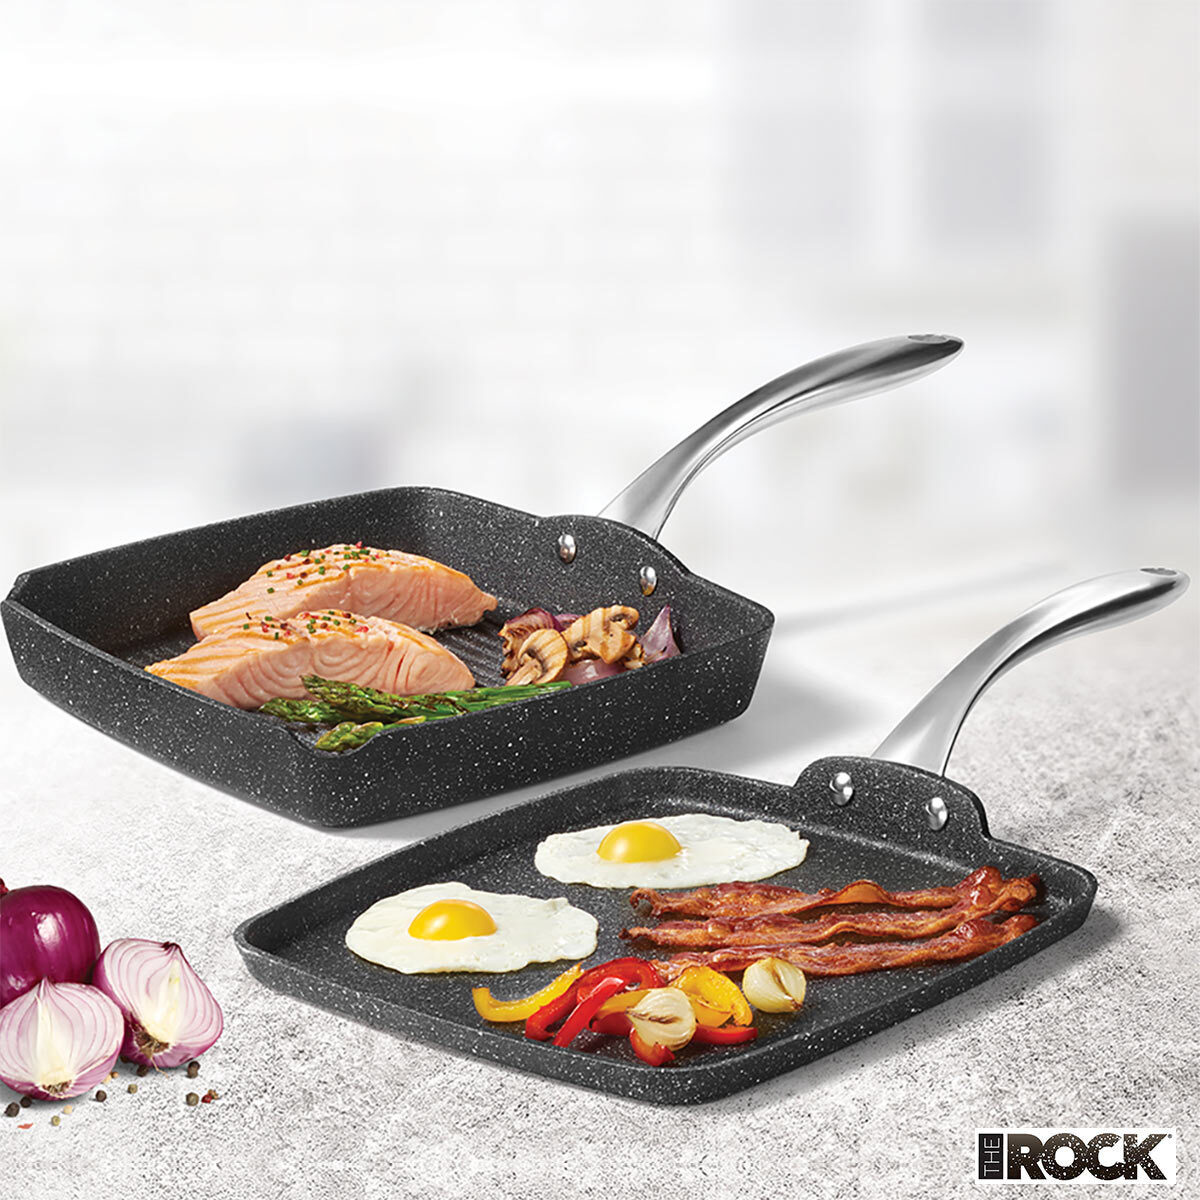 The Rock Grill Pan & Griddle Set